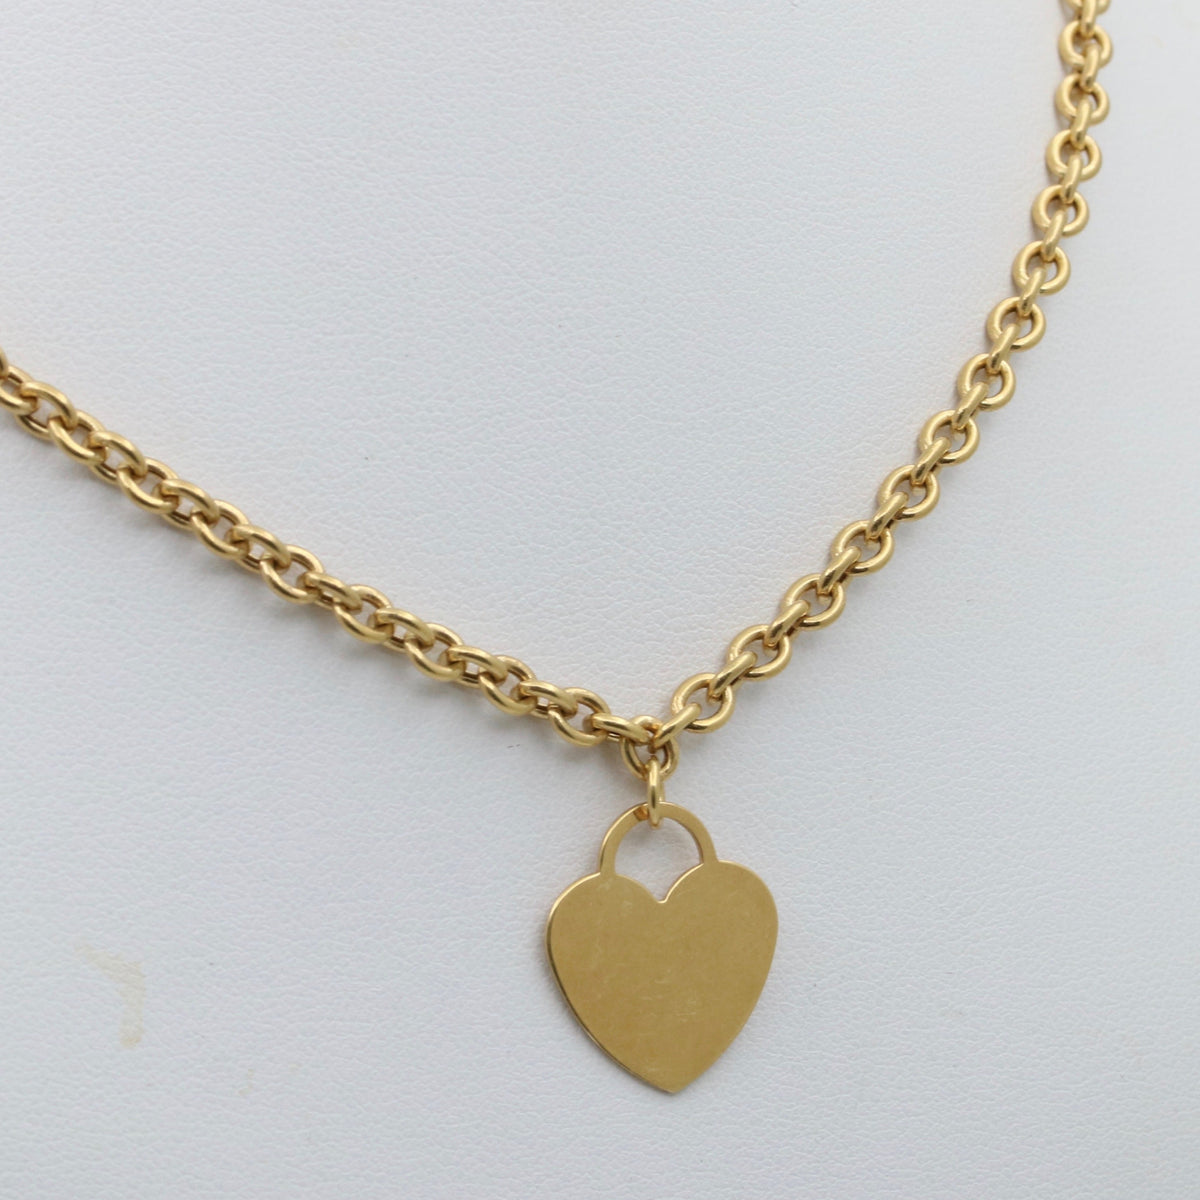 18K Gold Heart Tag and Cable Link Necklace, 18” Long